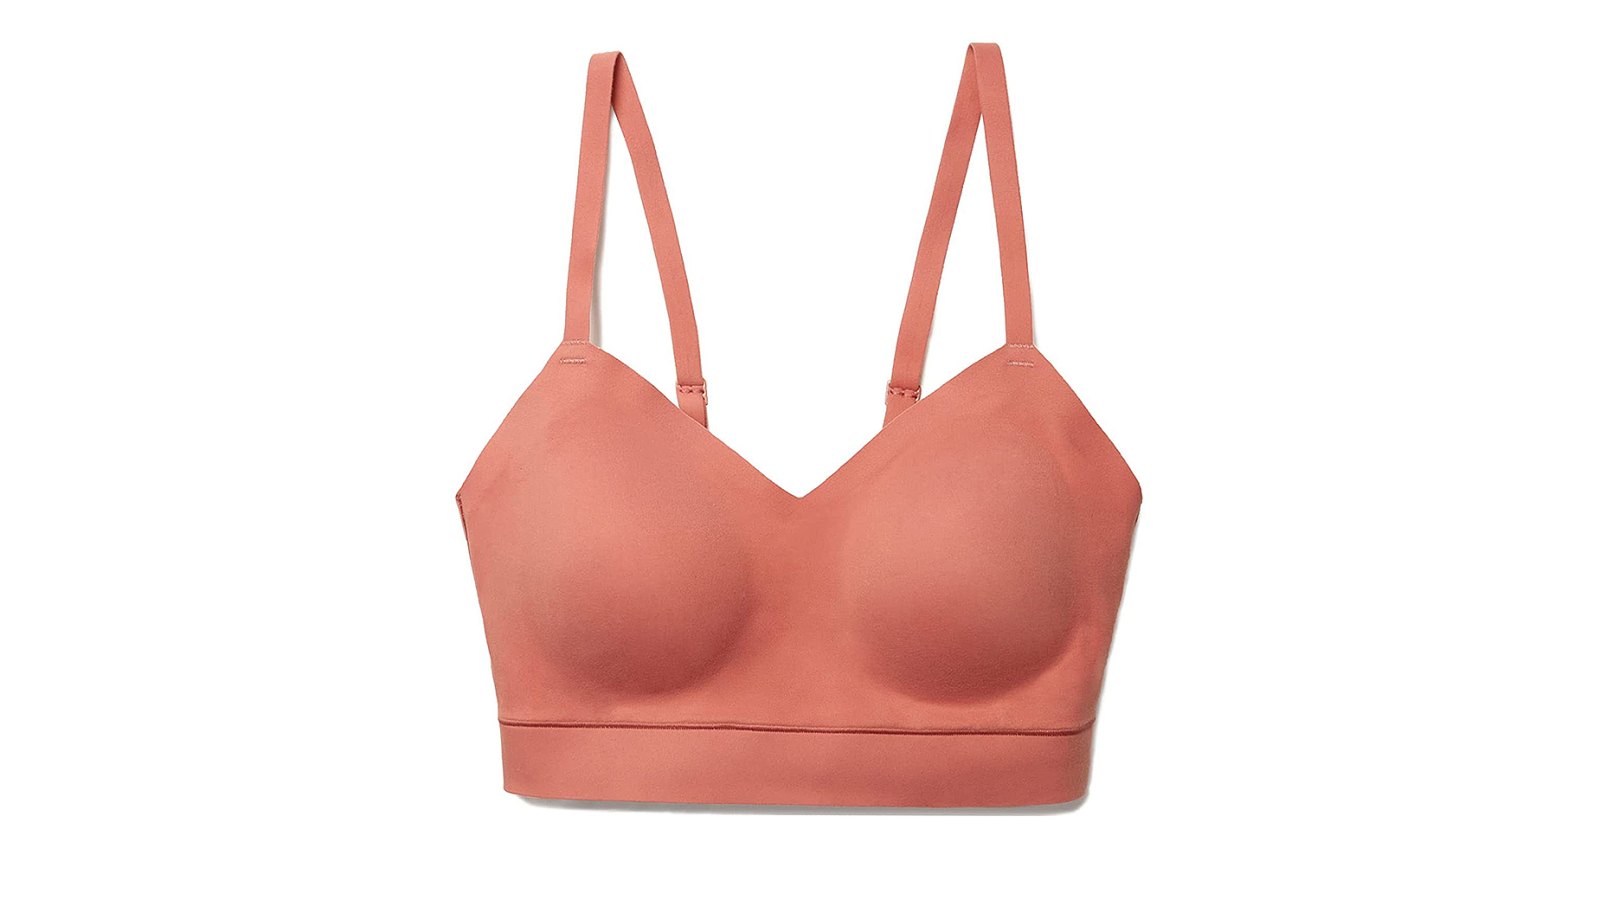 Keep calm & wear a bra that - Lovable Lingerie and Sport